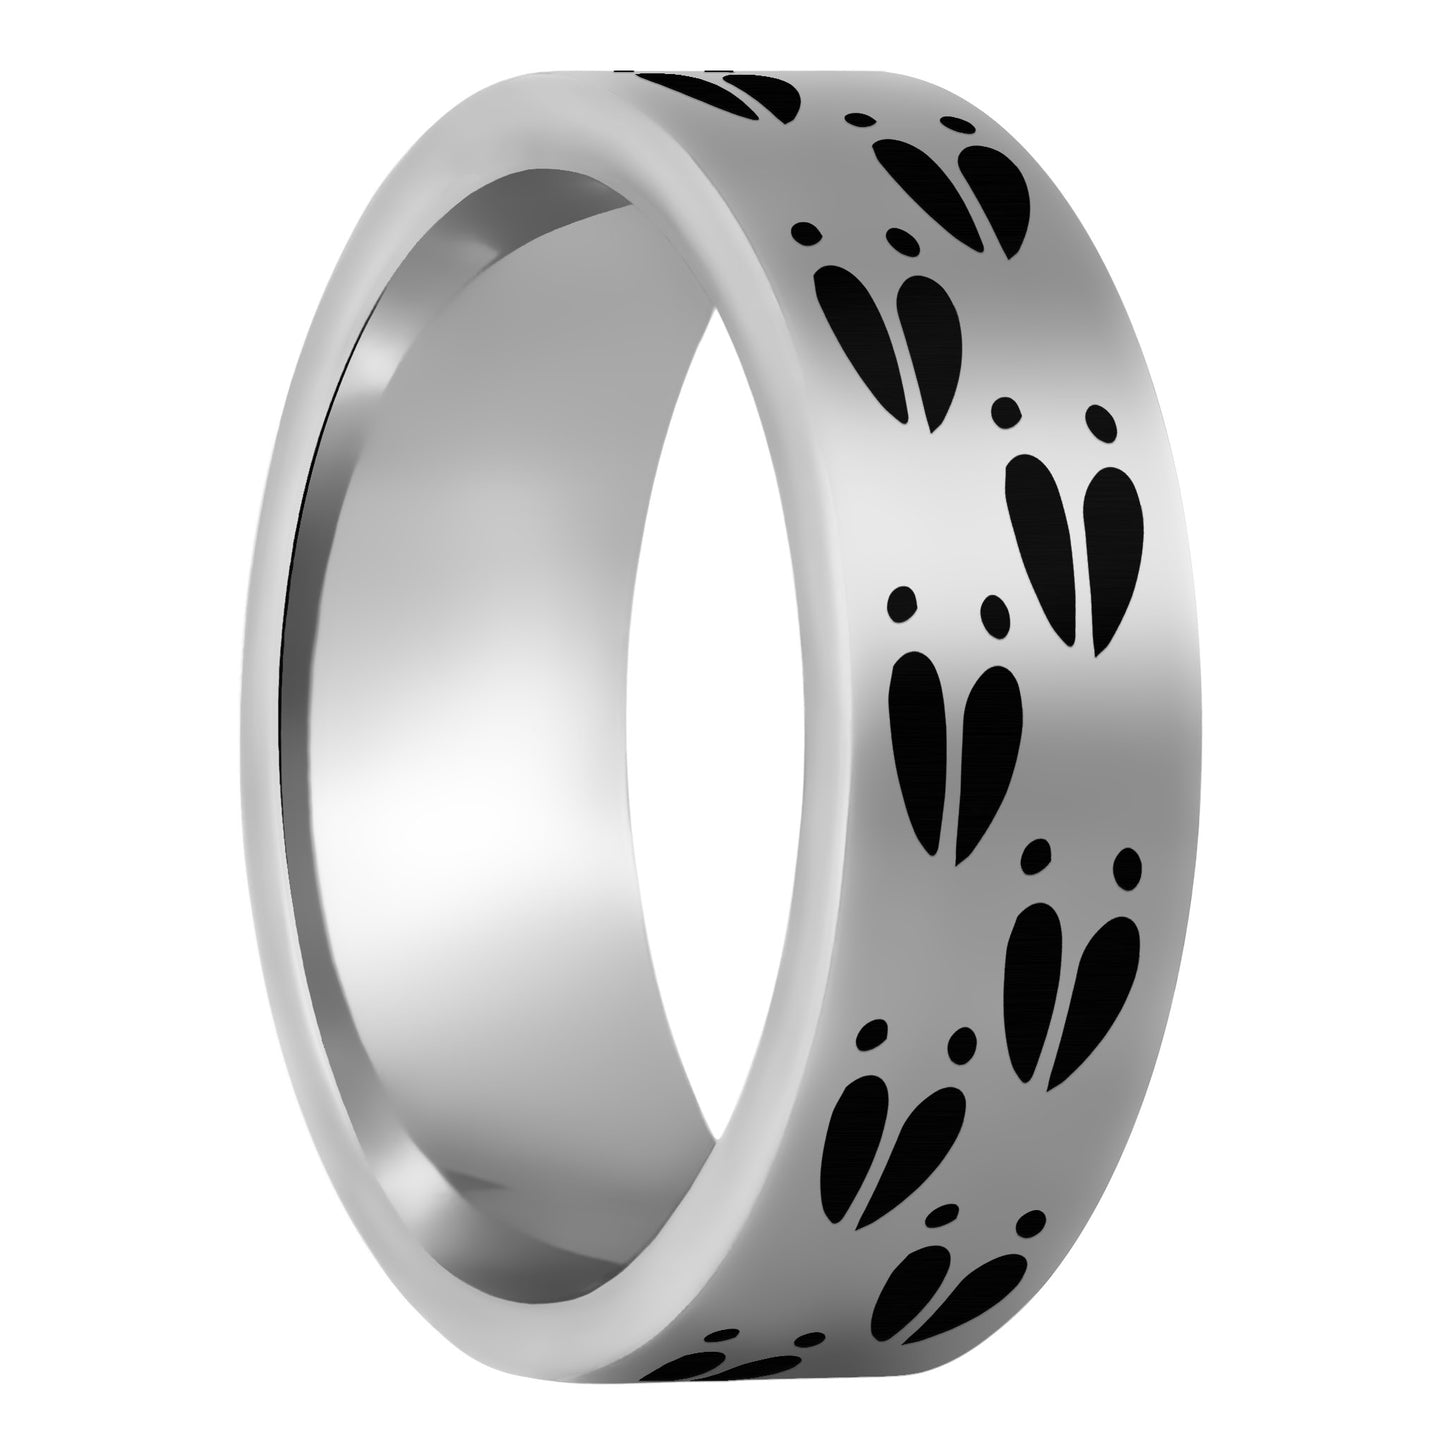 One Deer Track Tungsten Men's Wedding Band displayed on a plain white background